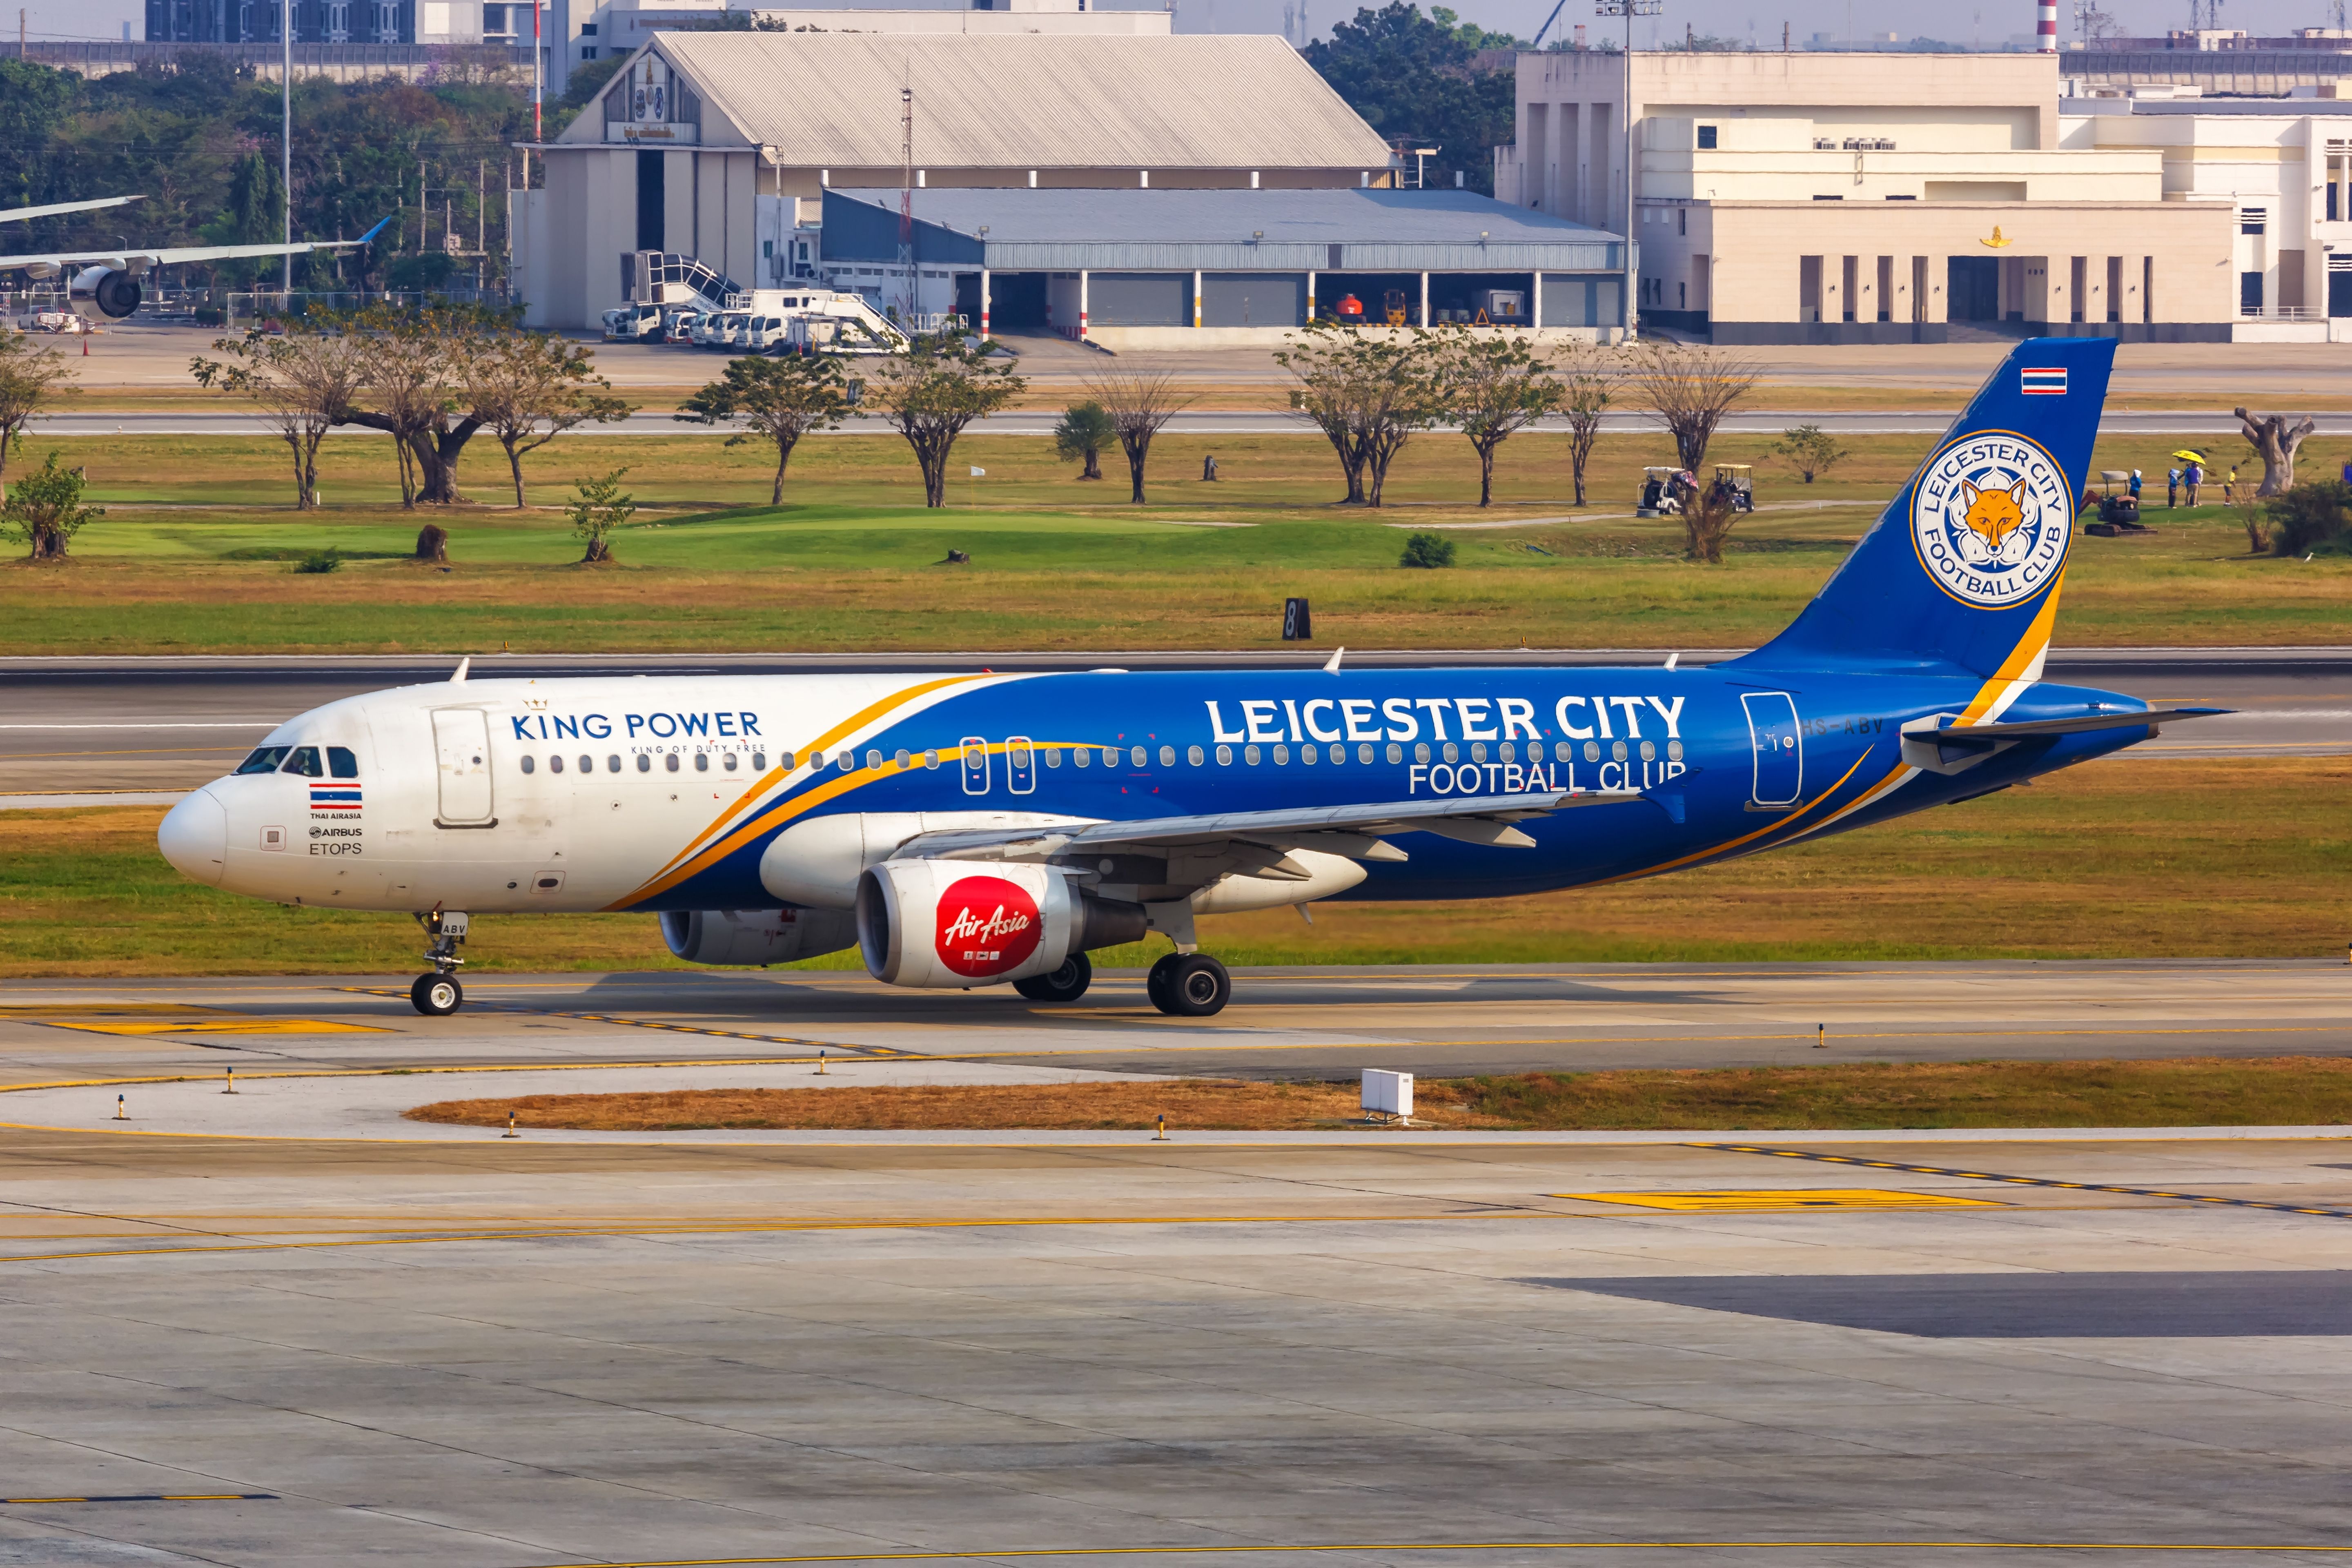 The Thai AirAsia Airbus A320 in Leicester City Livery, taxiing to the runway.